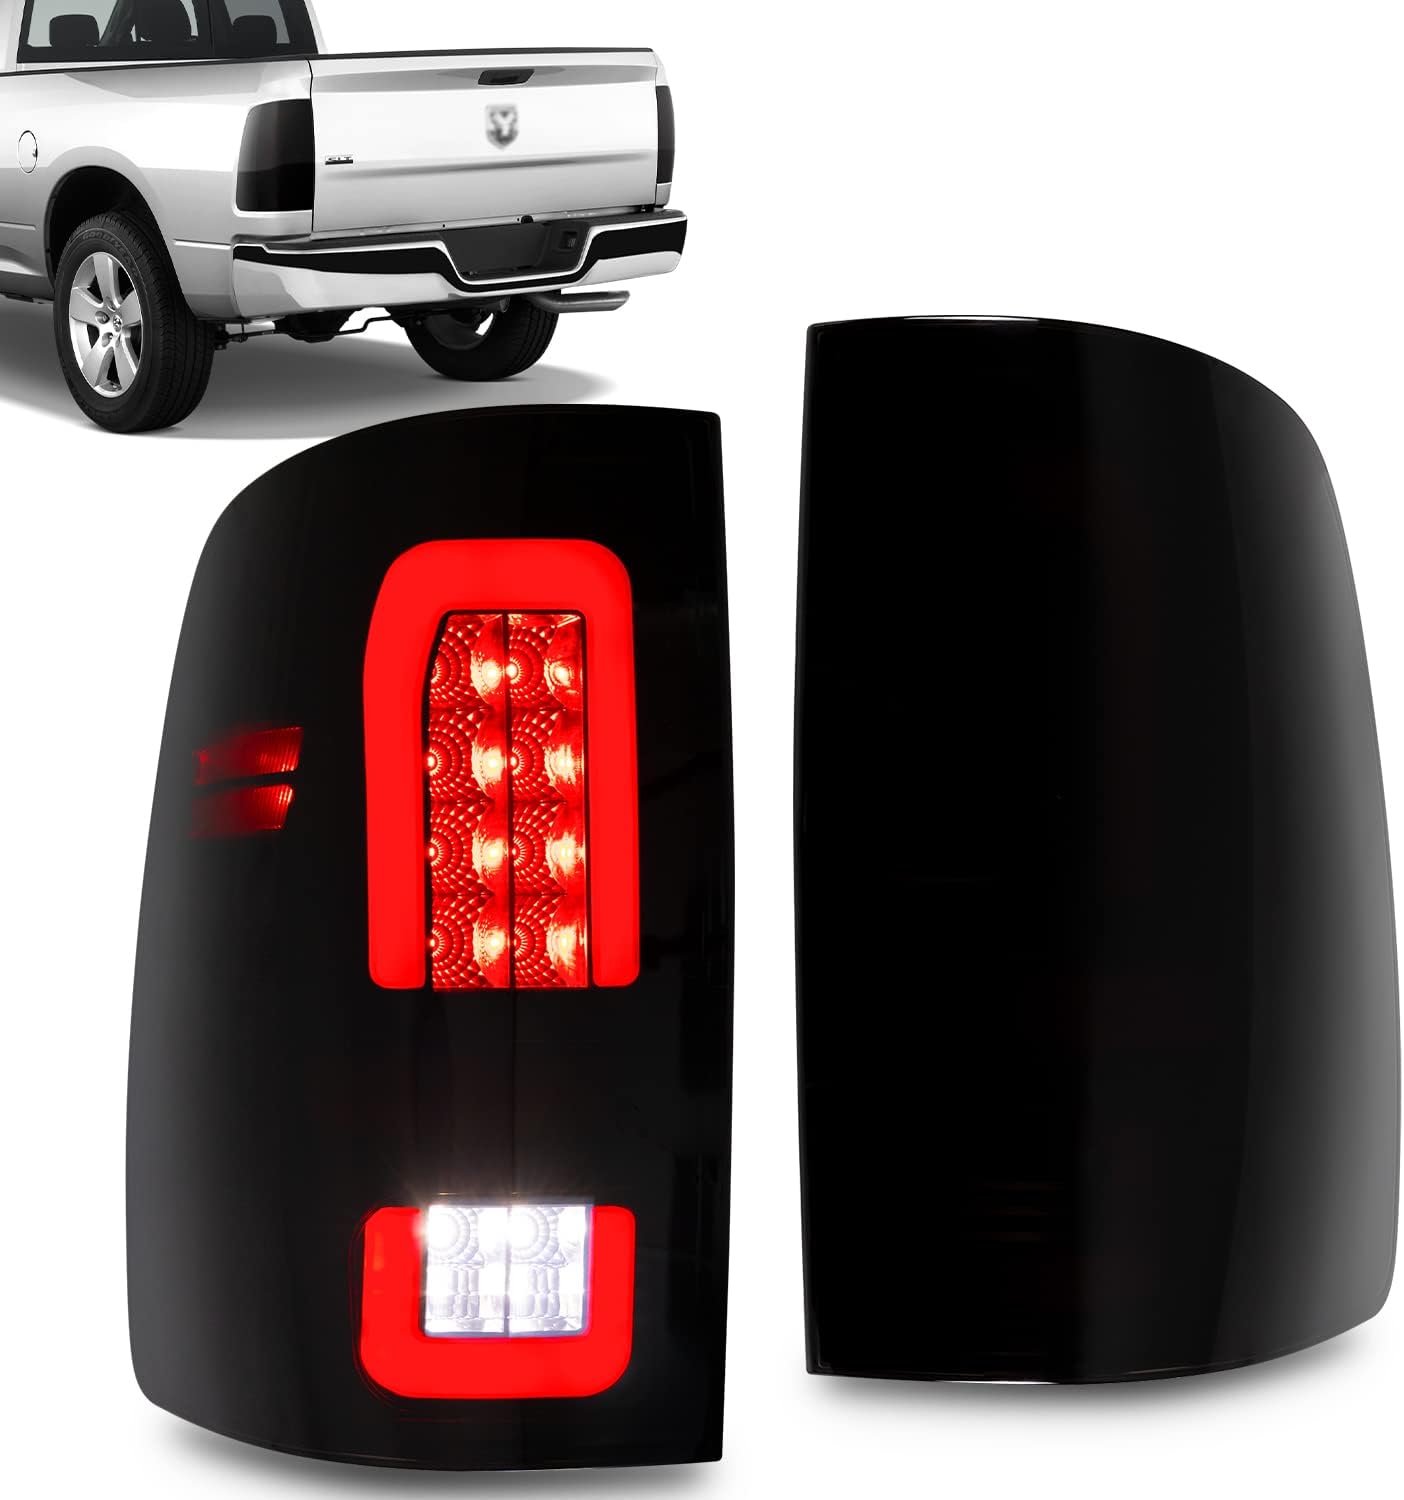 Upgraded 4 Functions LED Tail Light Assembly for 2009-2018 Dodge Ram 1500 2500 3500